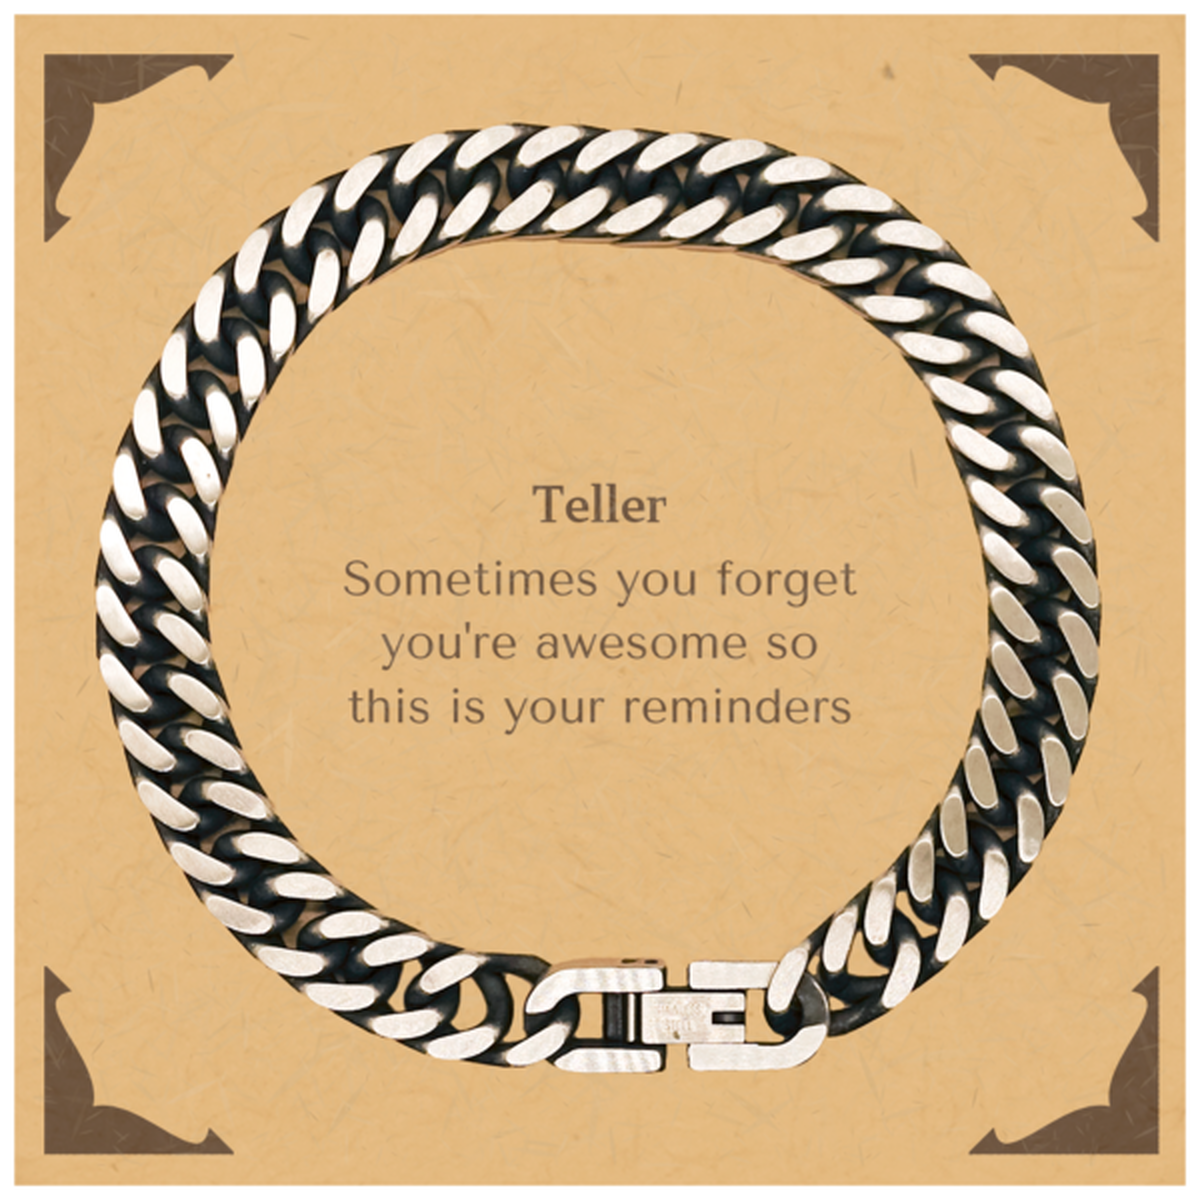 Sentimental Teller Cuban Link Chain Bracelet, Teller Sometimes you forget you're awesome so this is your reminders, Graduation Christmas Birthday Gifts for Teller, Men, Women, Coworkers